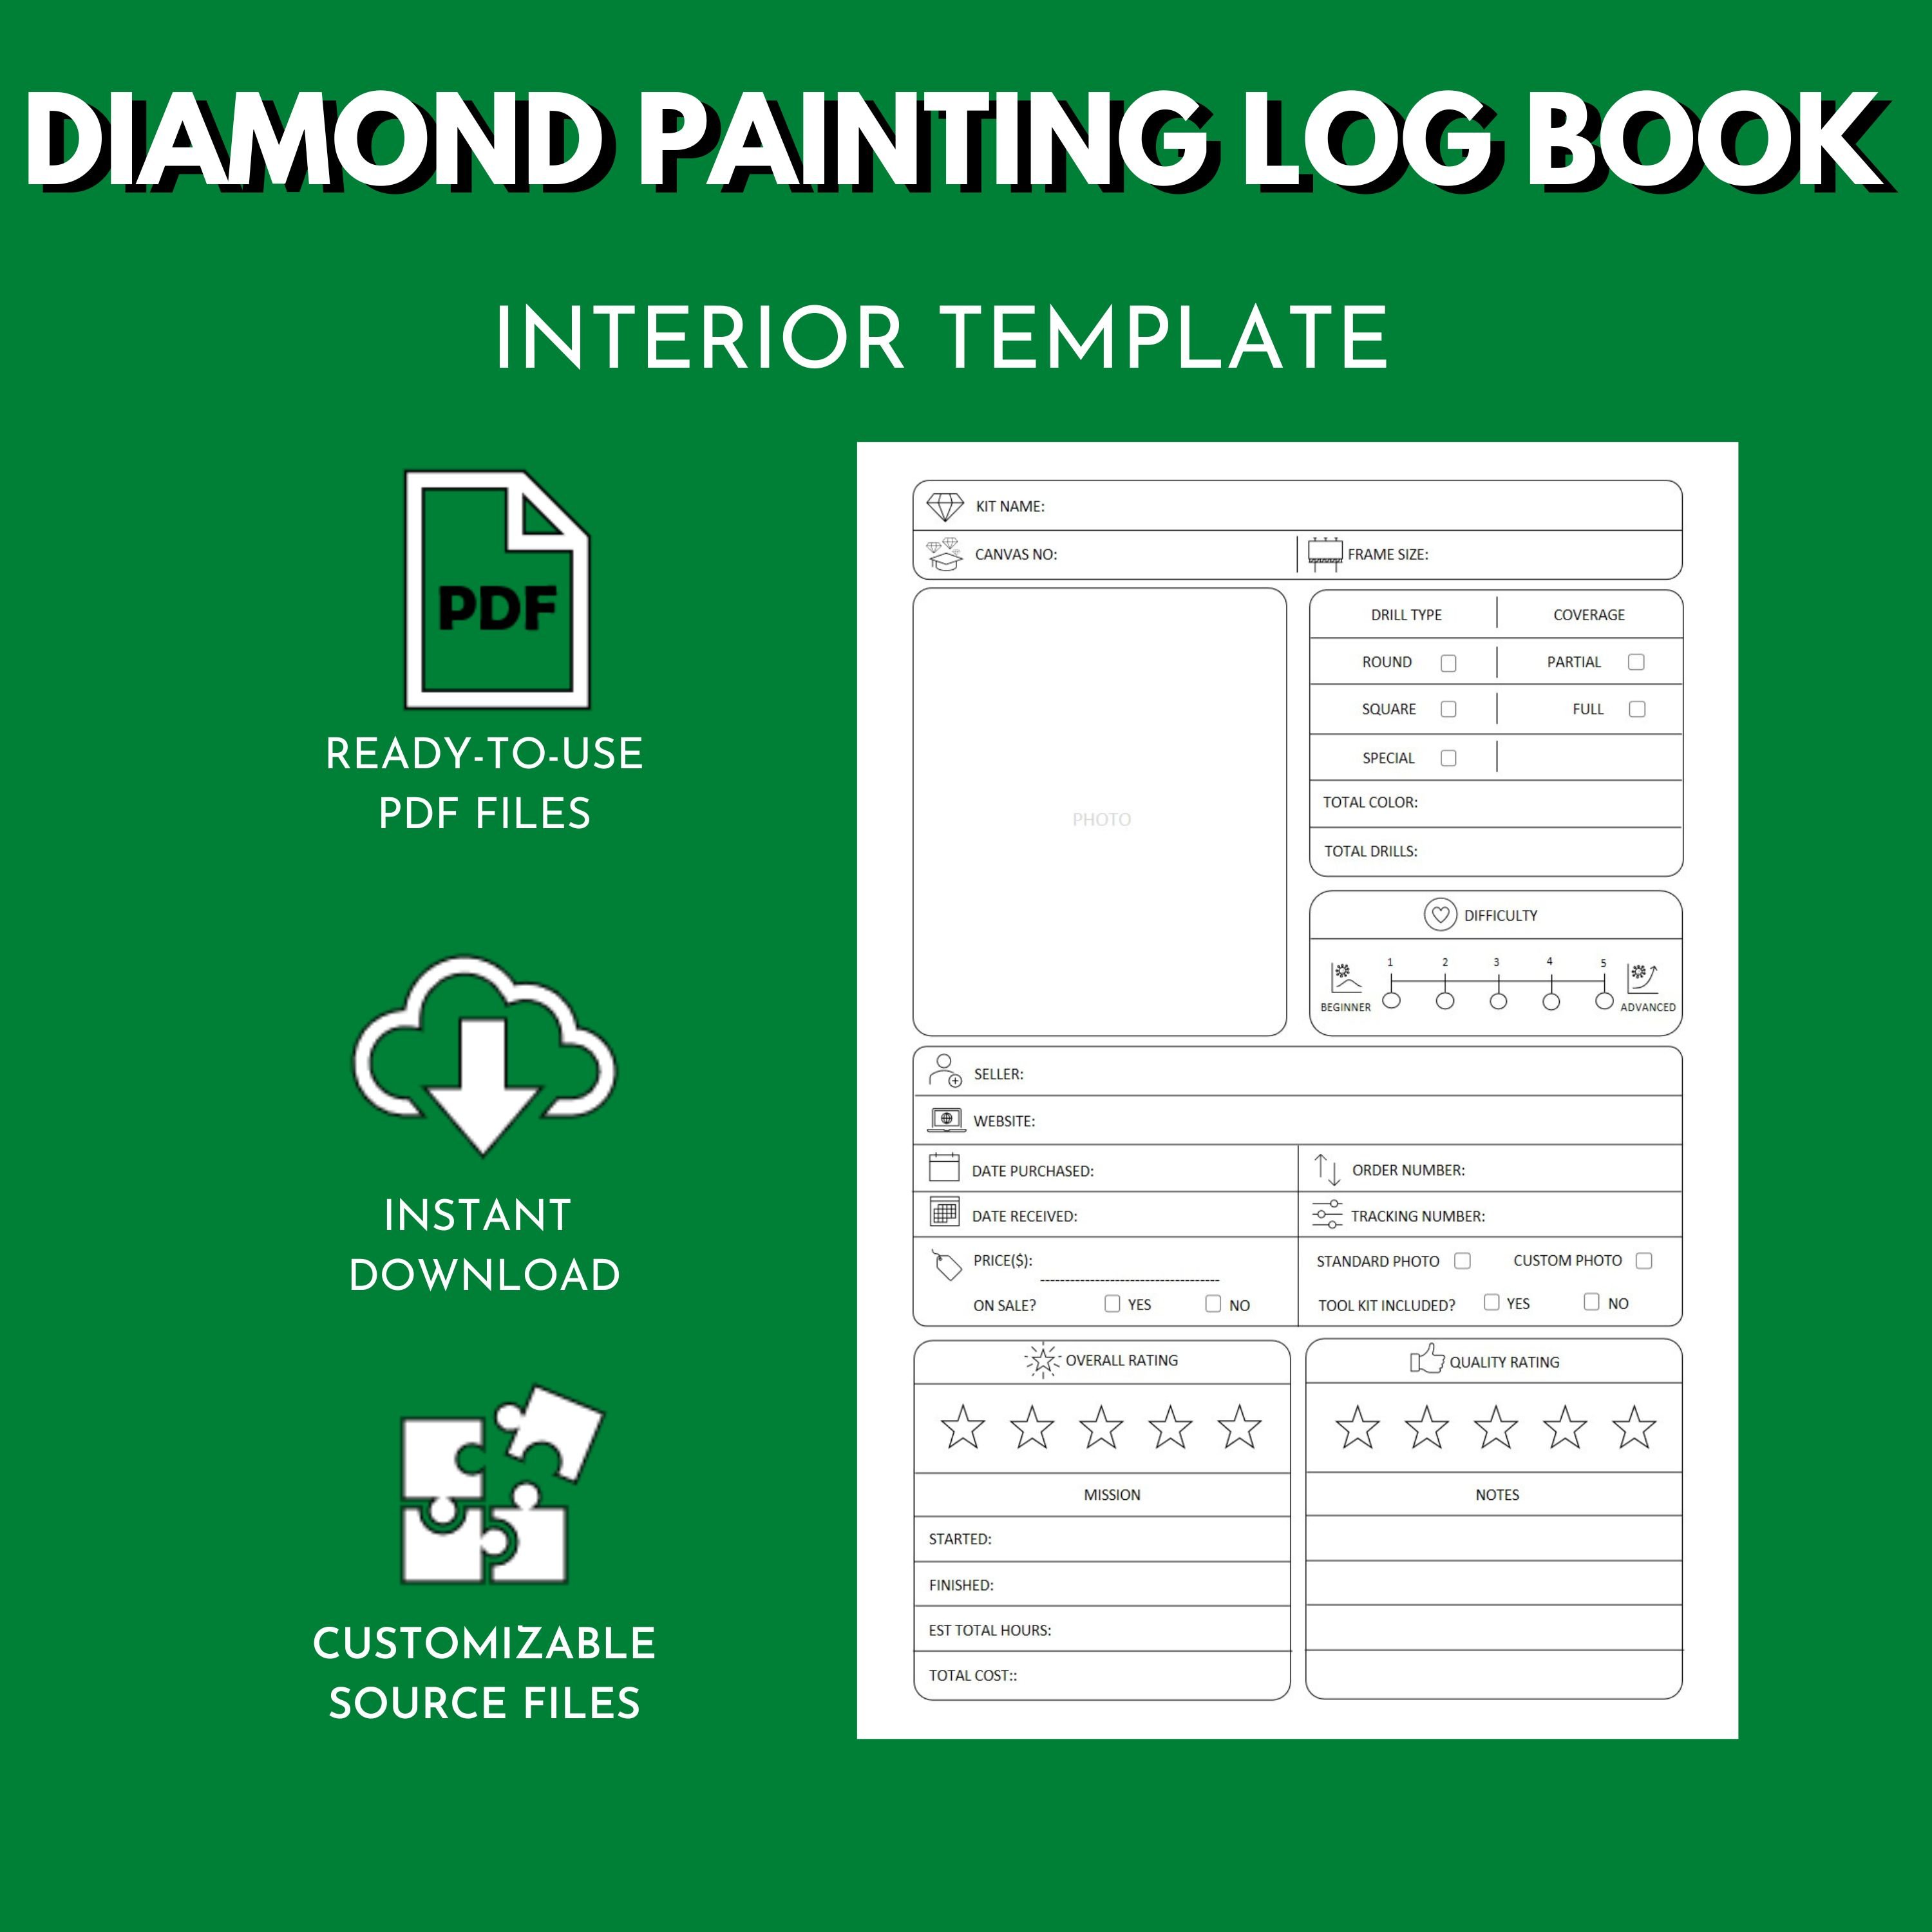 Diamond Painting Log Book KDP Interior Graphic by Creative Express